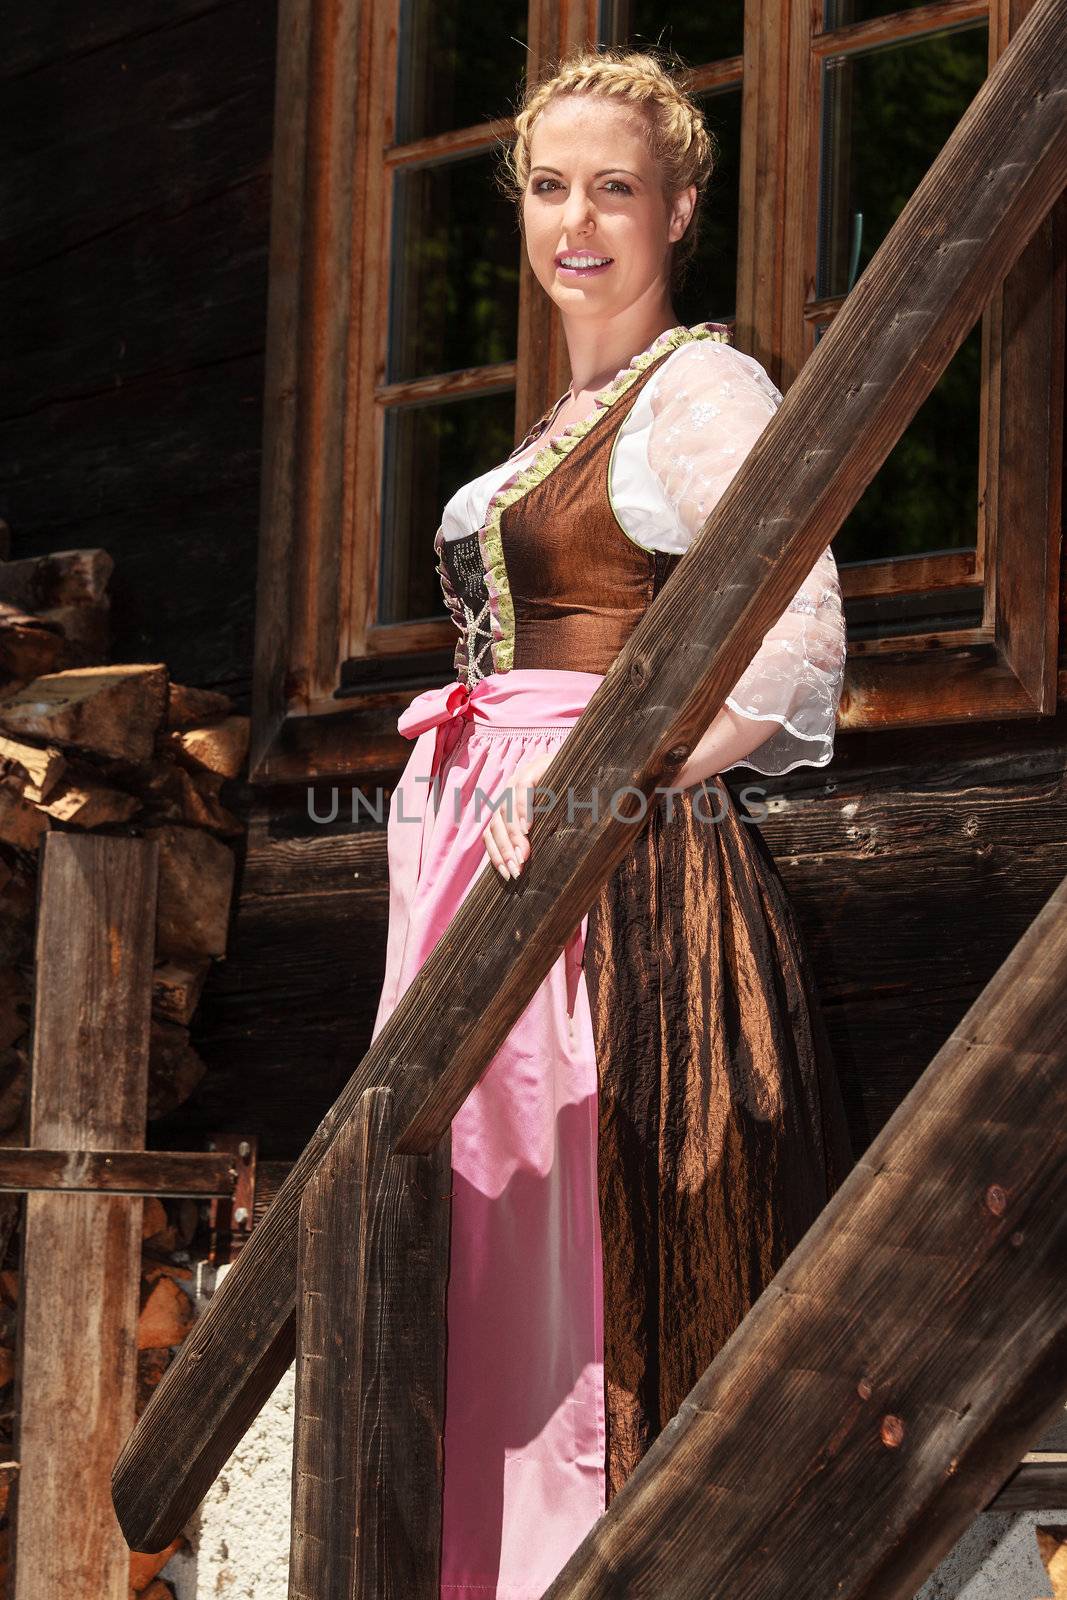 Bavarian girl is in festive costume on a mountain, stairs